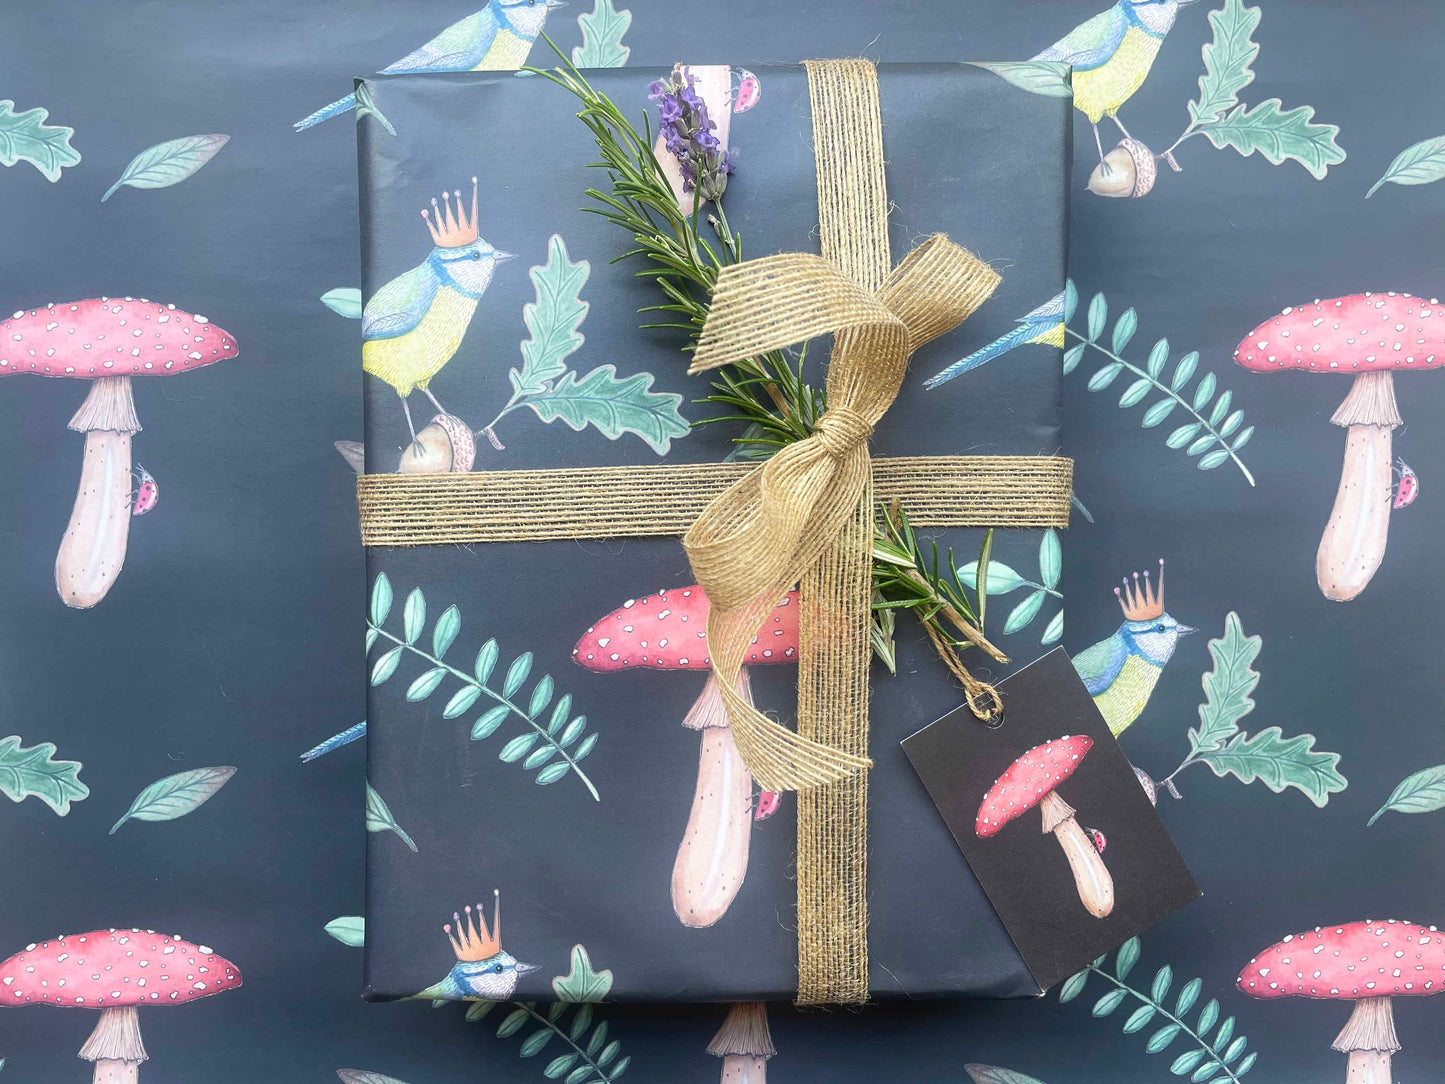 Party Tit and Mushroom wrapping paper